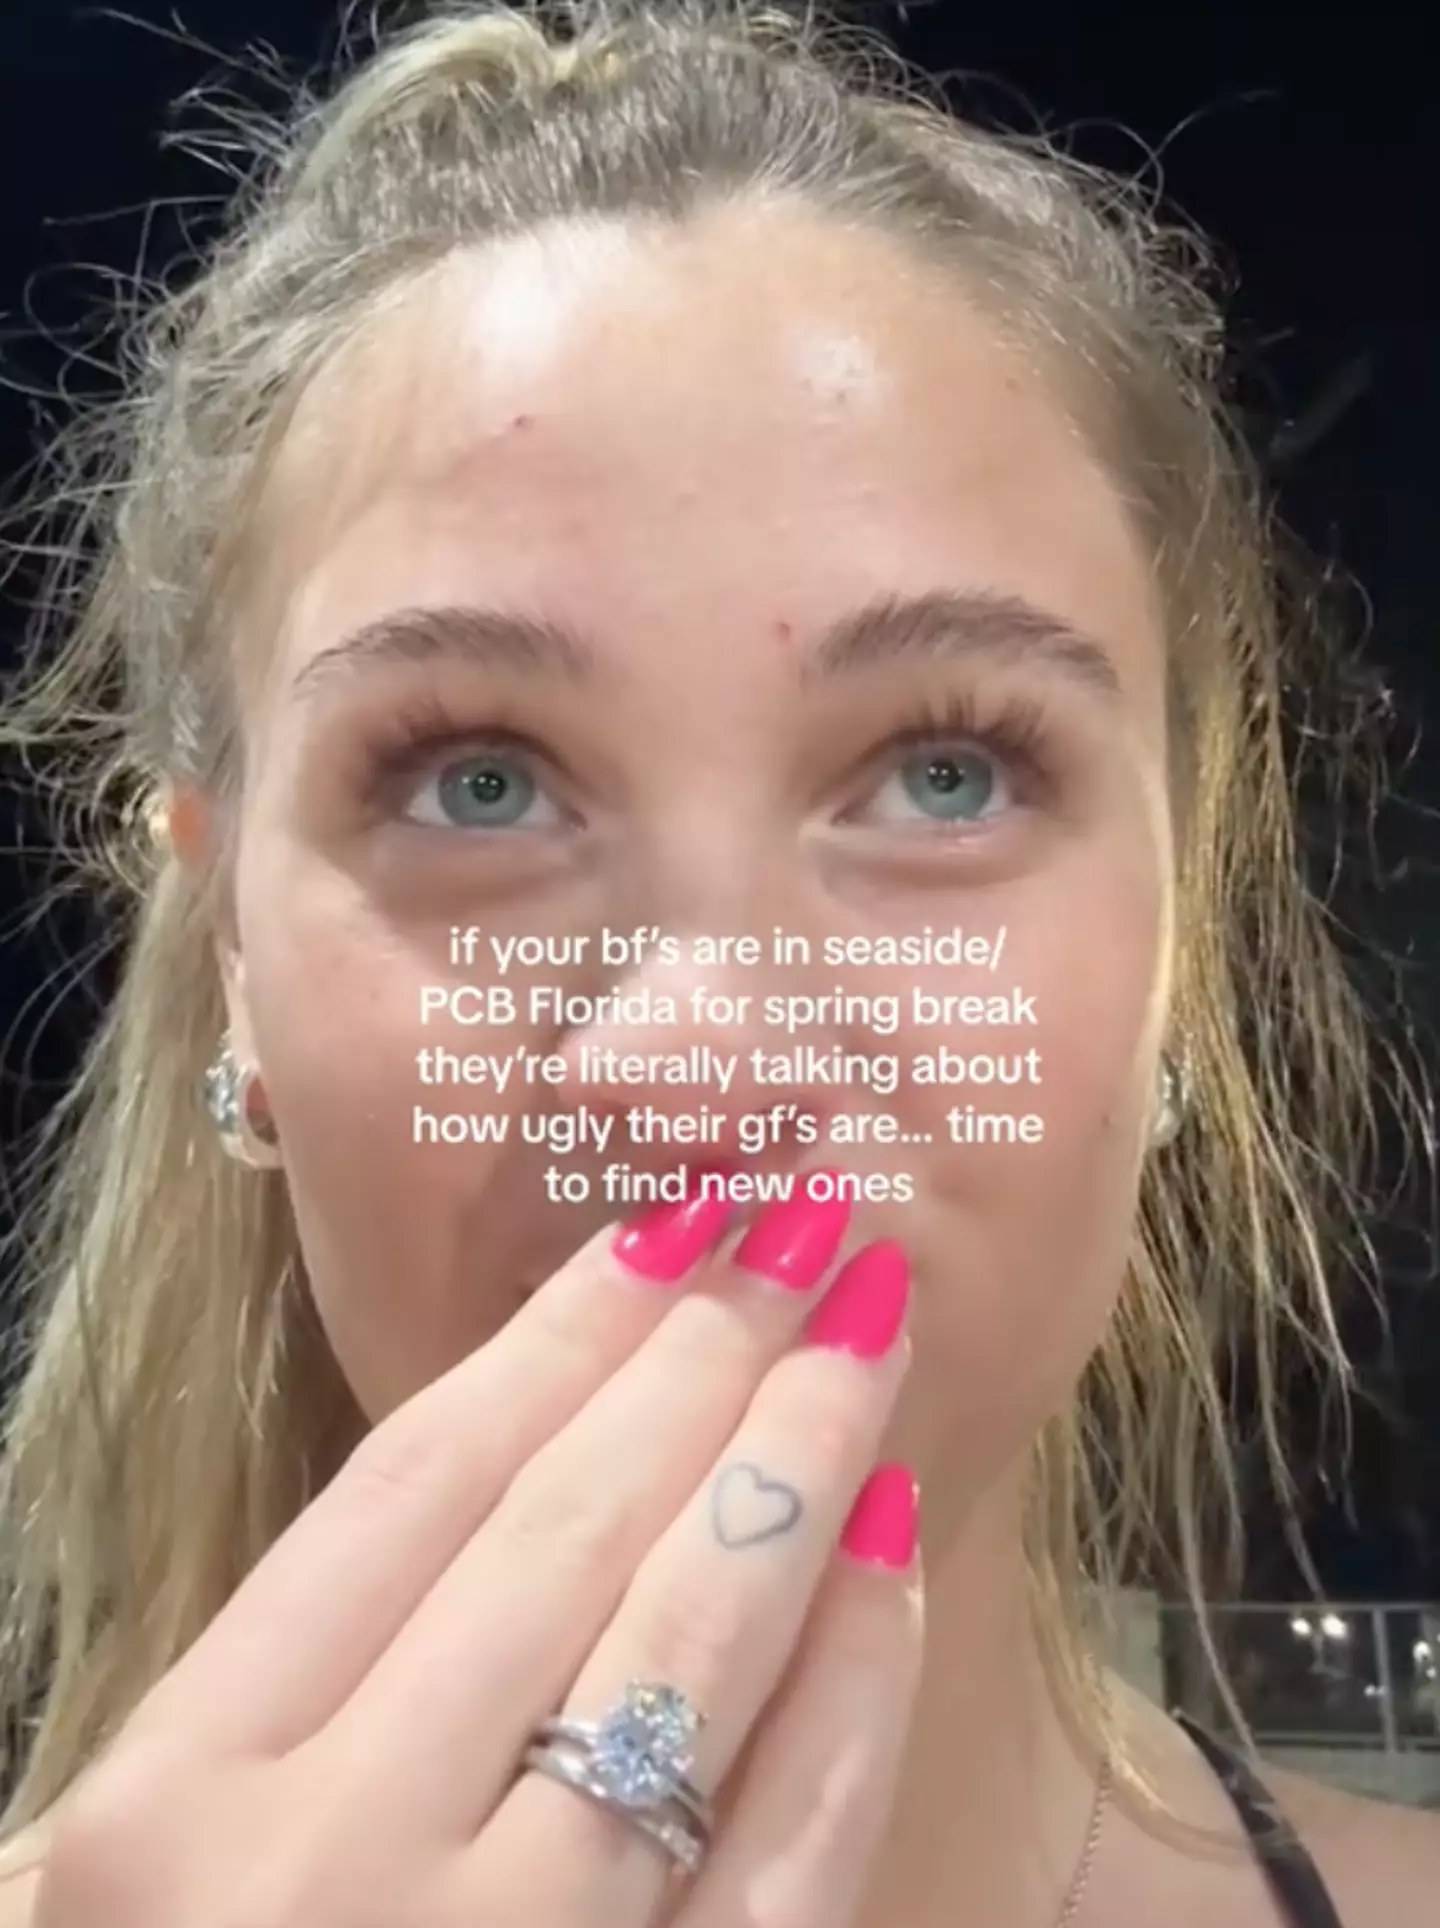 Anna exposed the group of boyfriends on her TikTok.